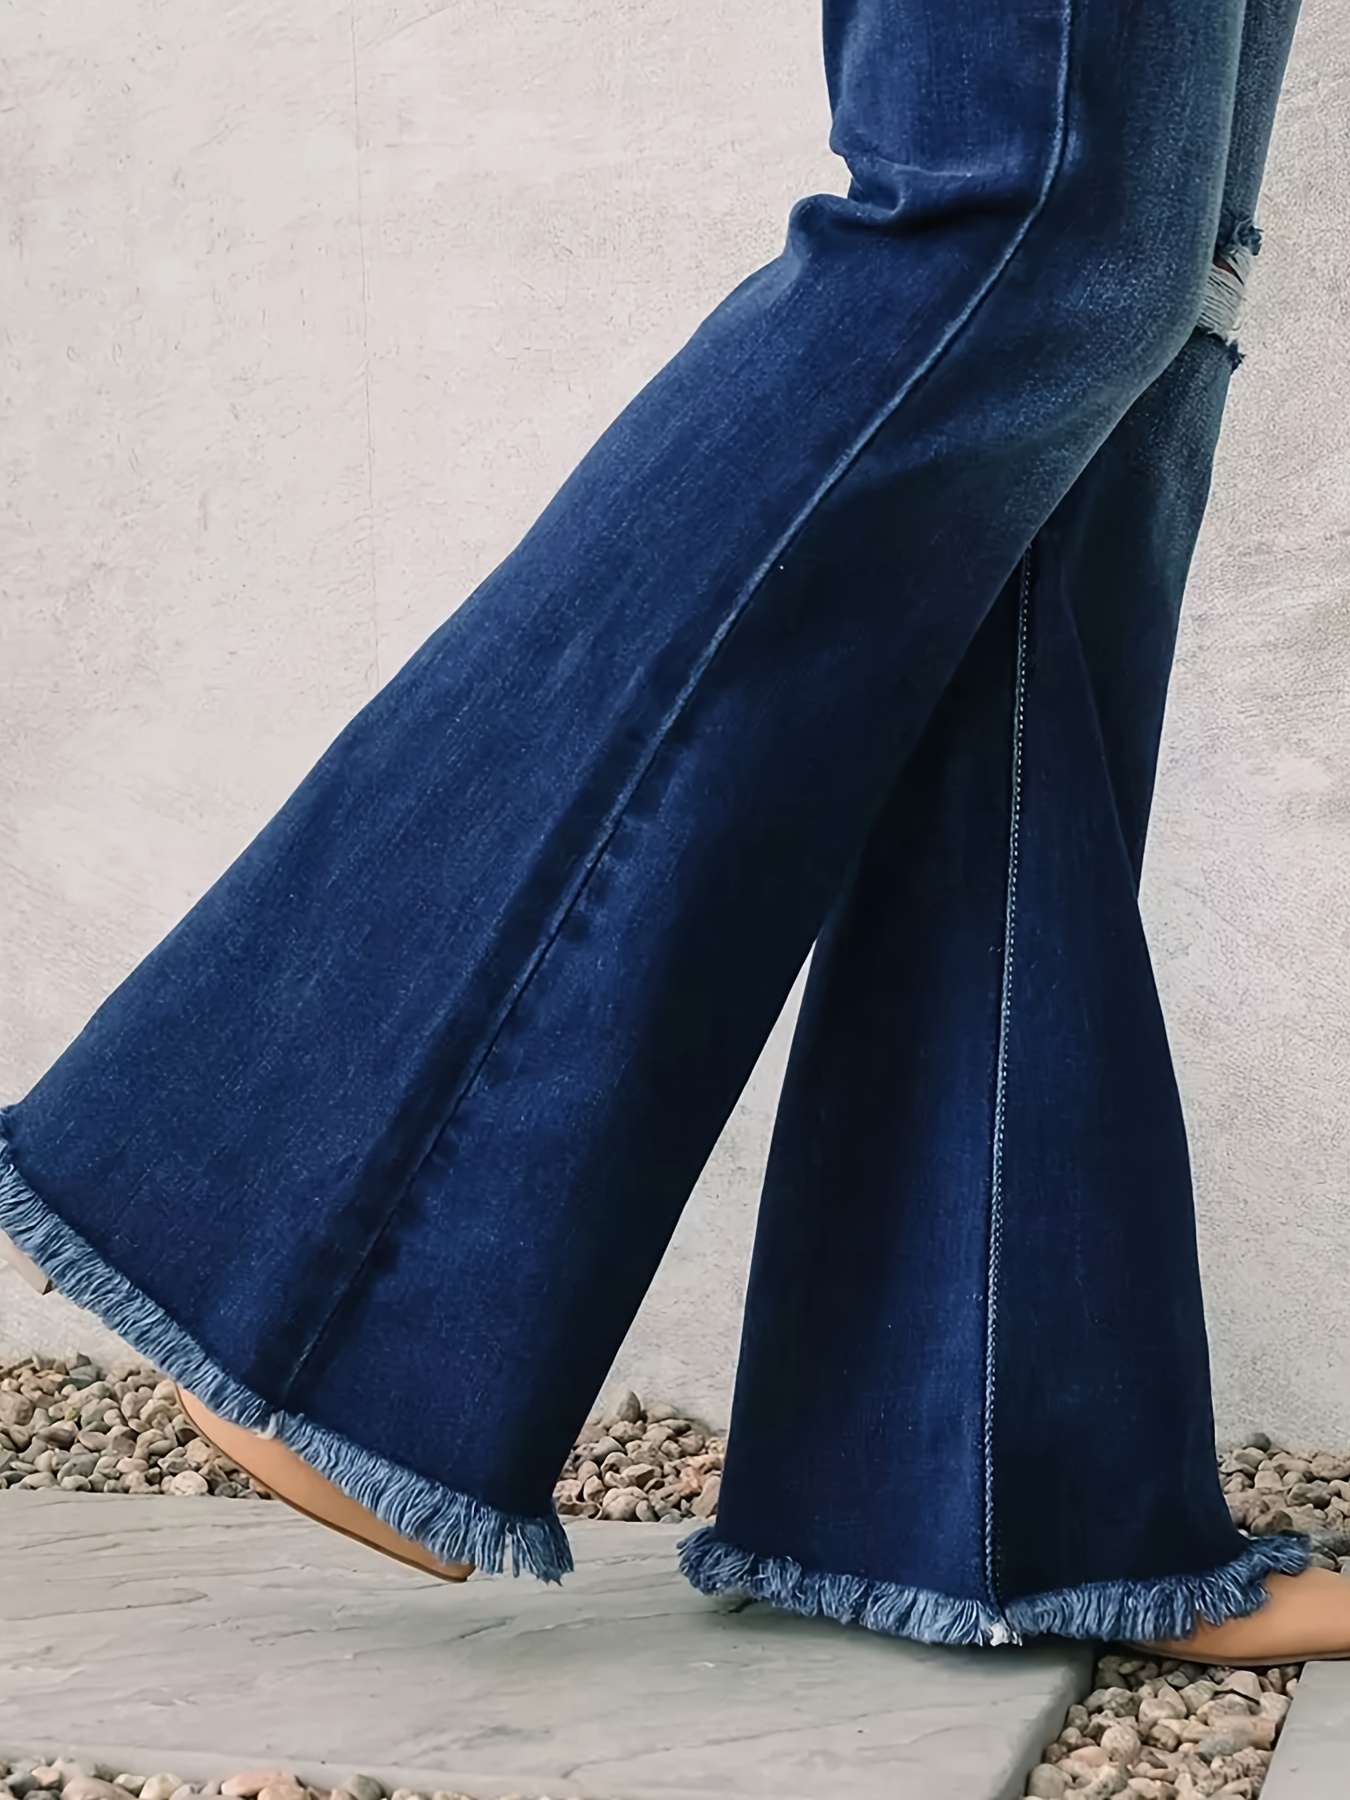 Bell Bottom Jeans for Women High Waisted Jean with Classic Wide Leg Ripped  Denim Pants Slim Fit Washed Long Pants